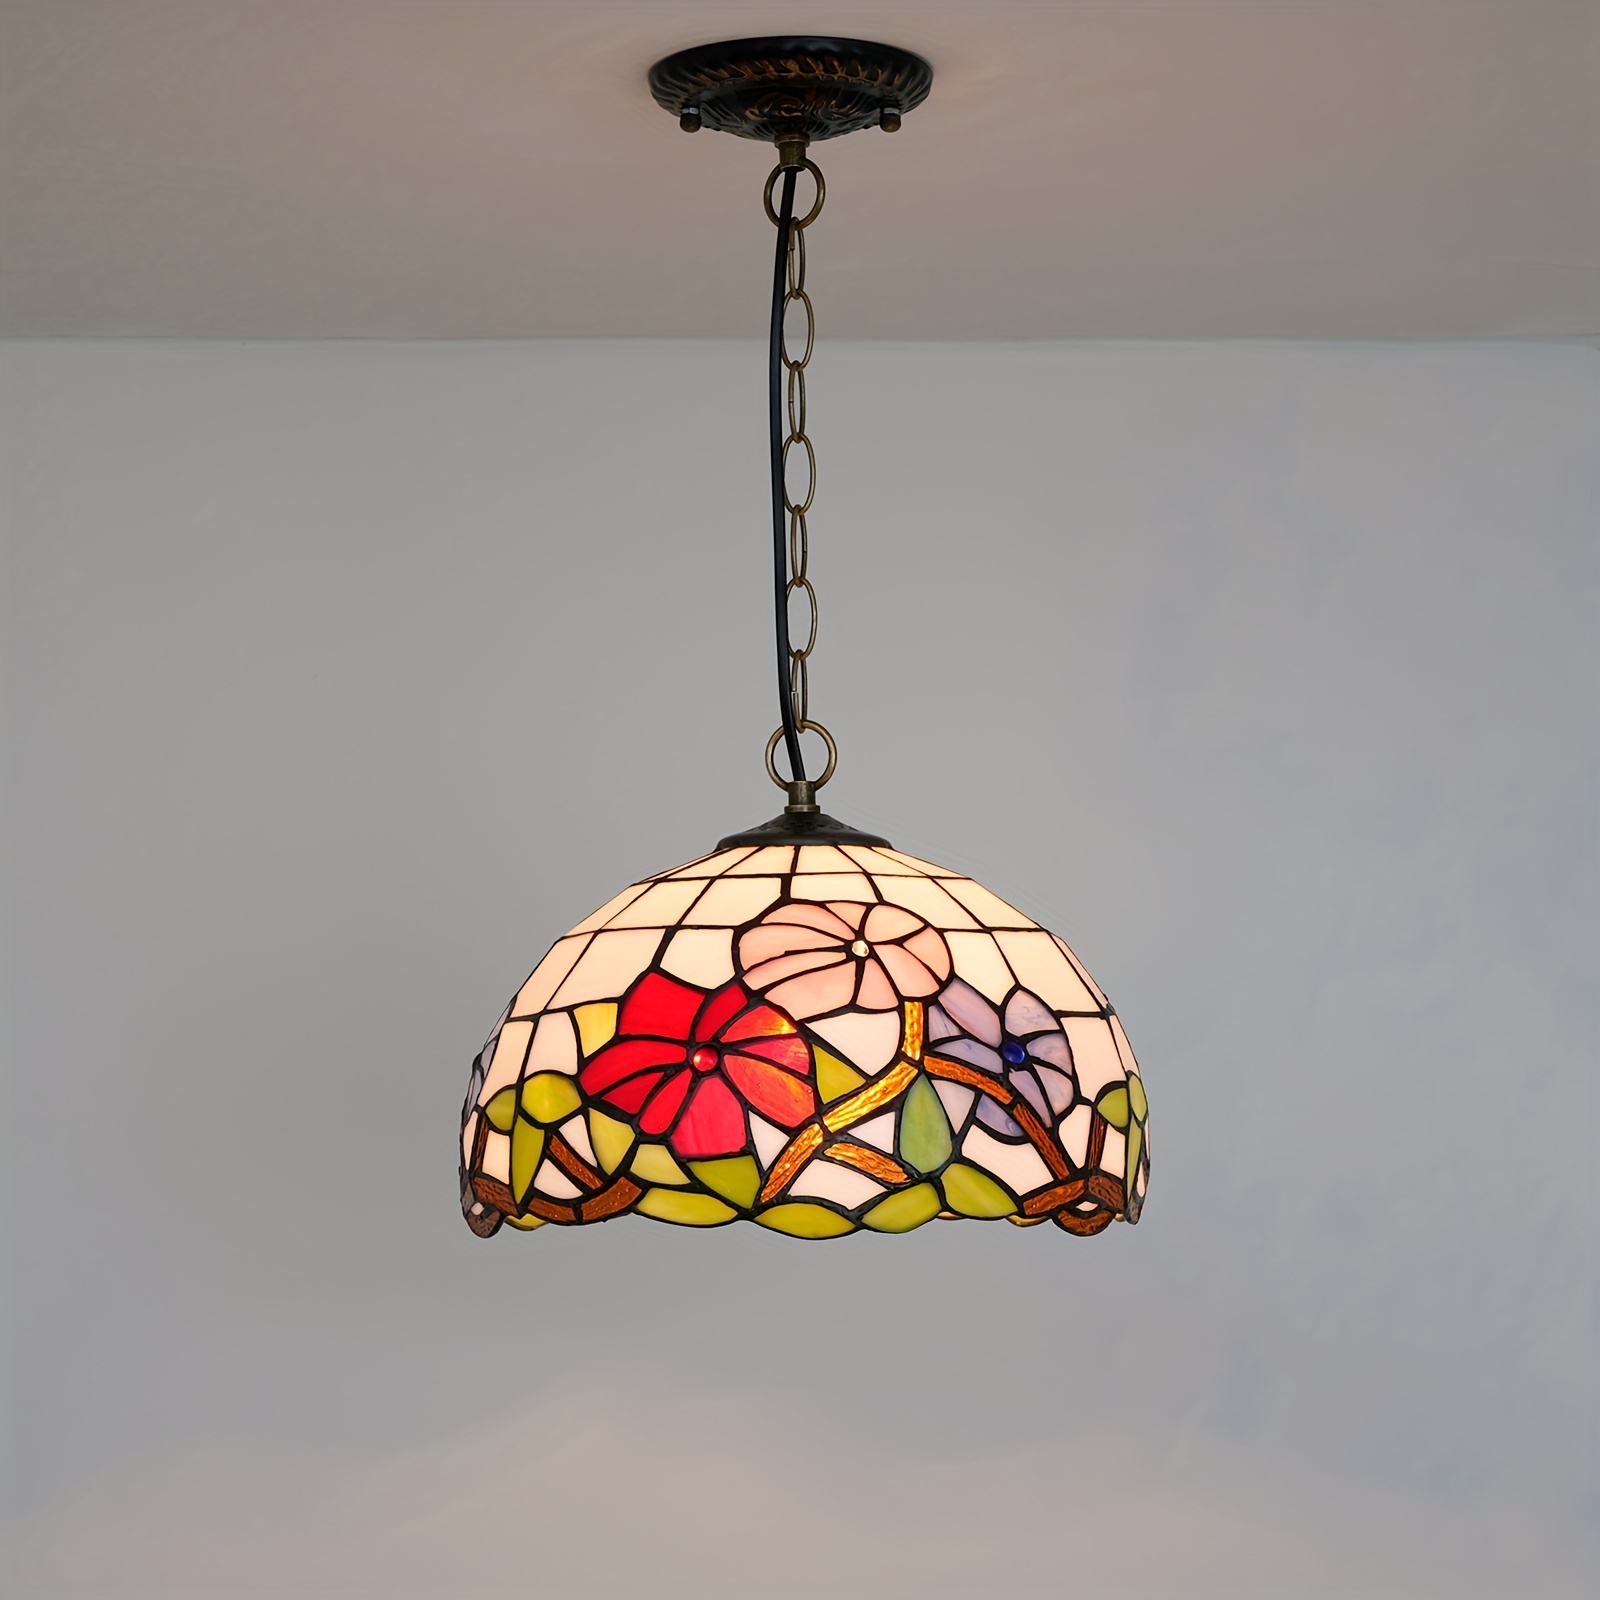 Tiffany Pendant Lamp And Fixtures Stained Glass Room Decor Antique